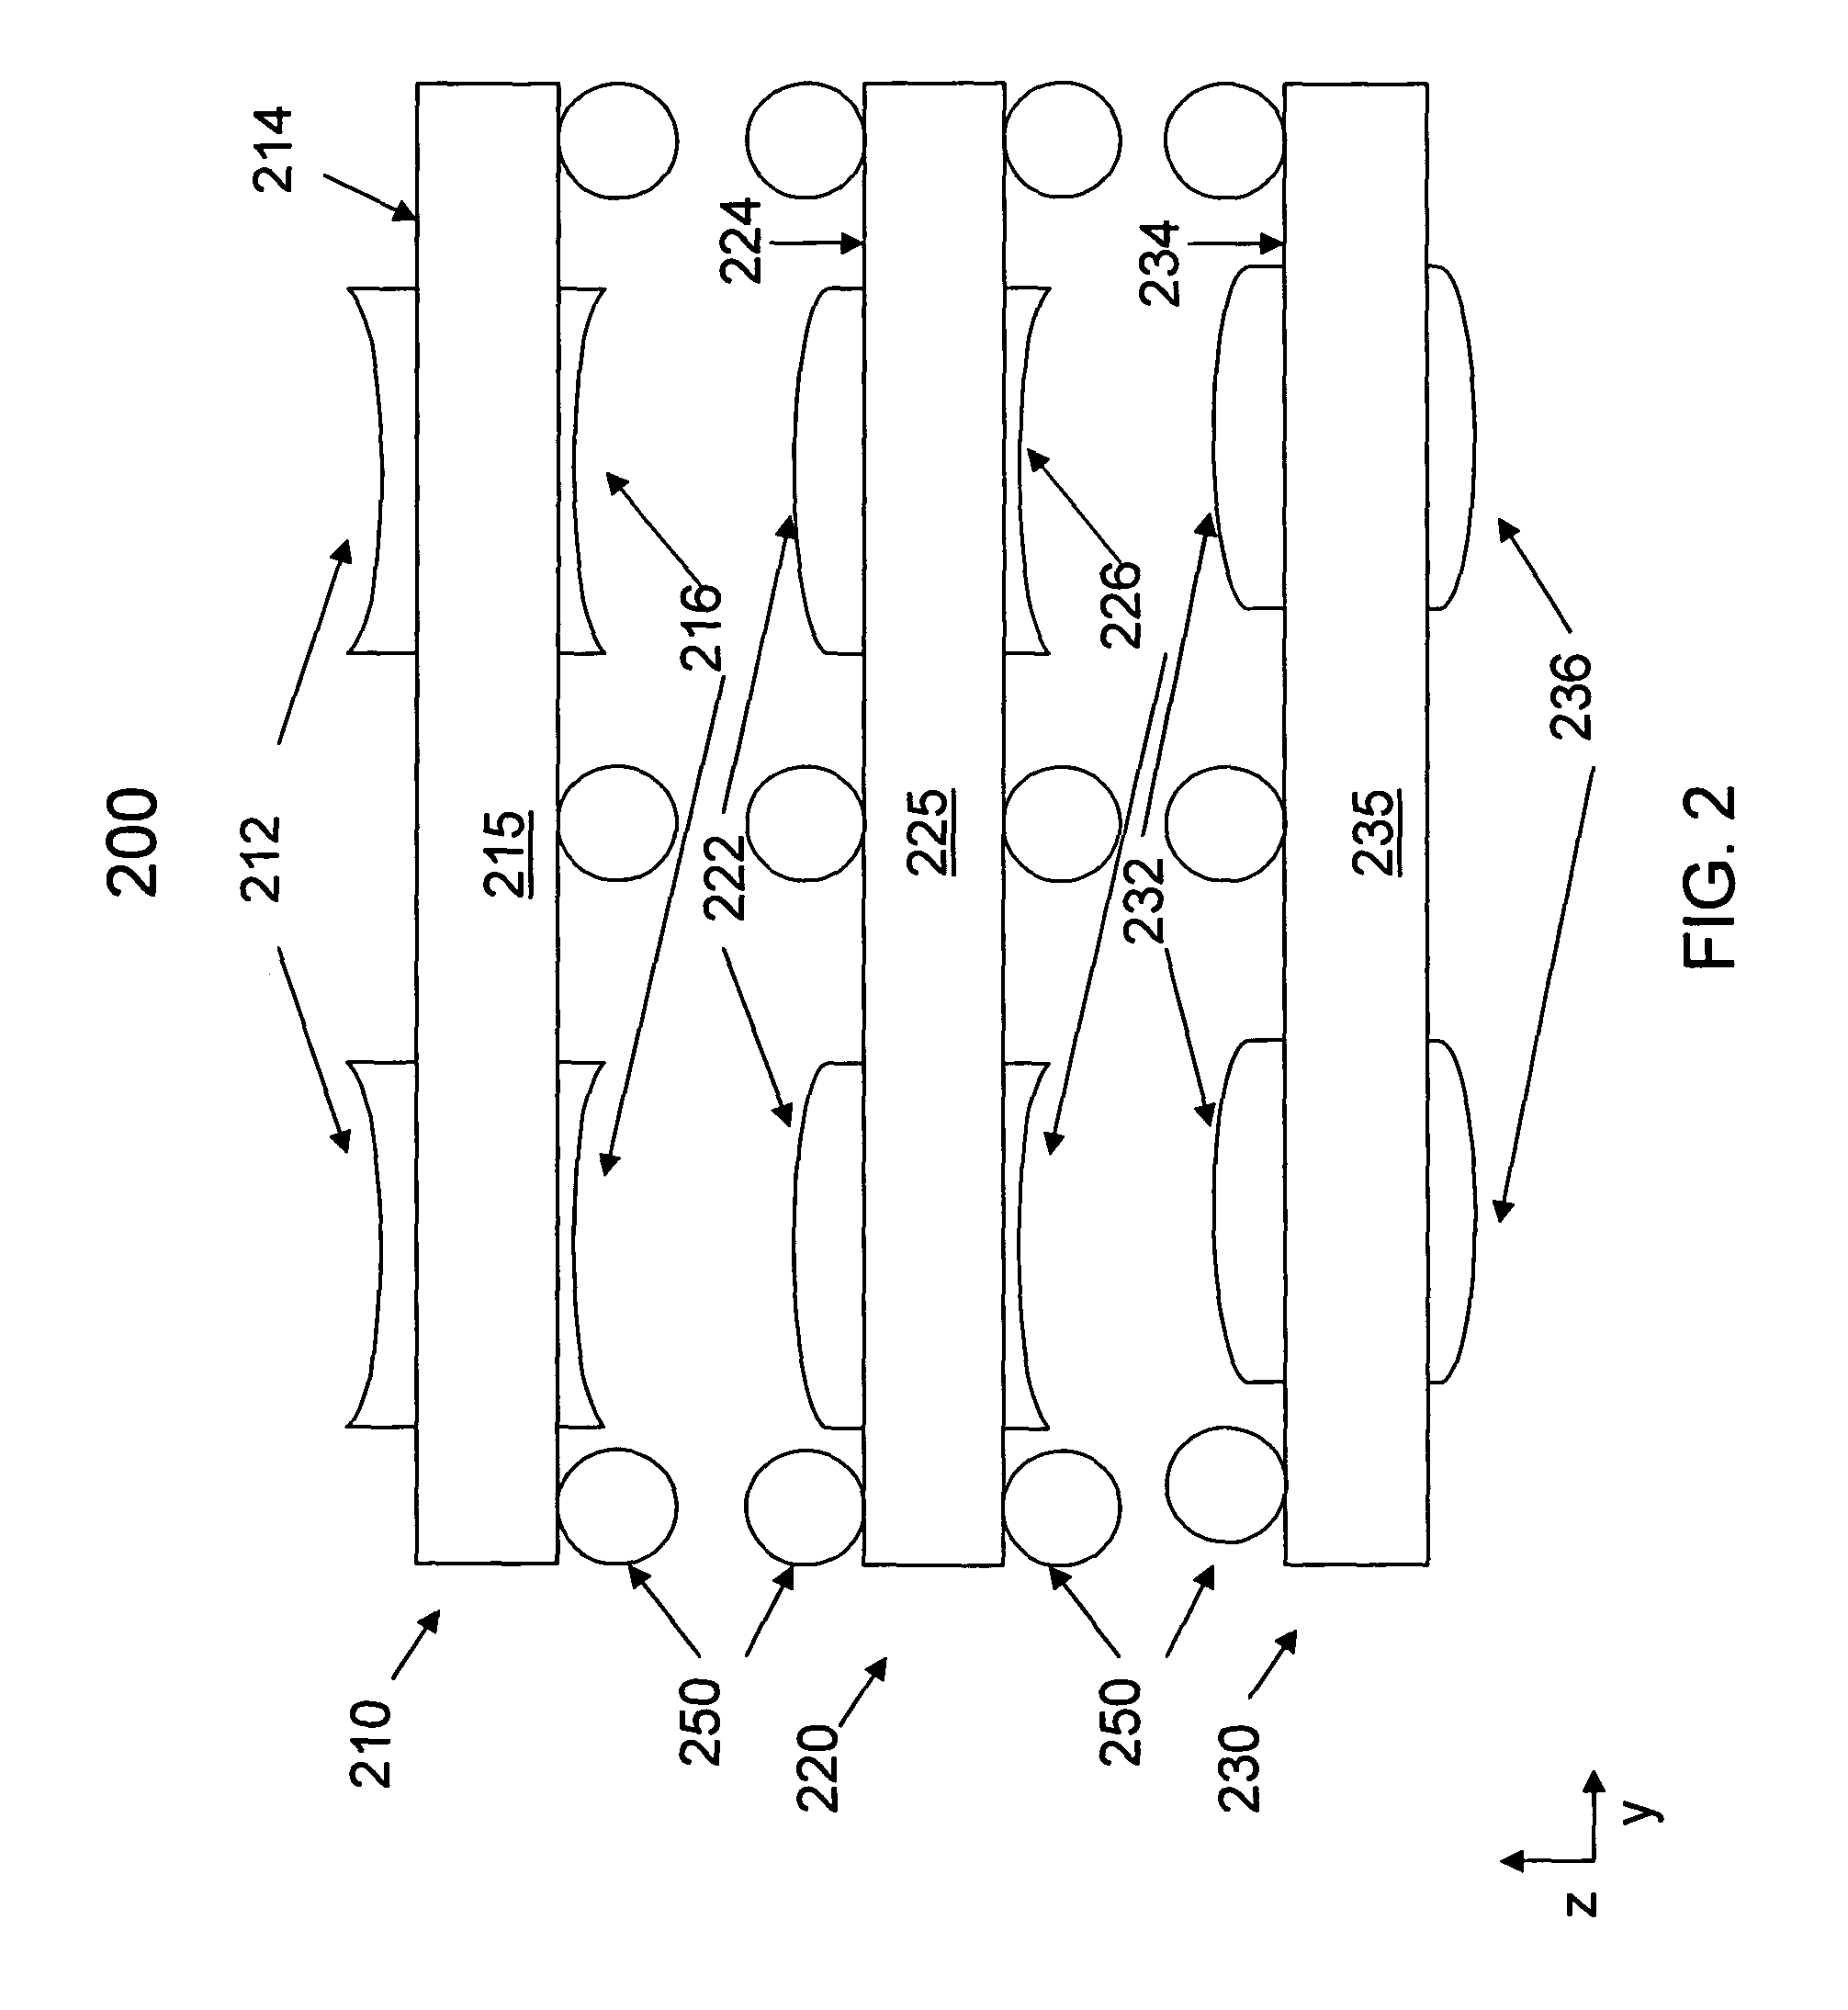 Optical device and associated methods